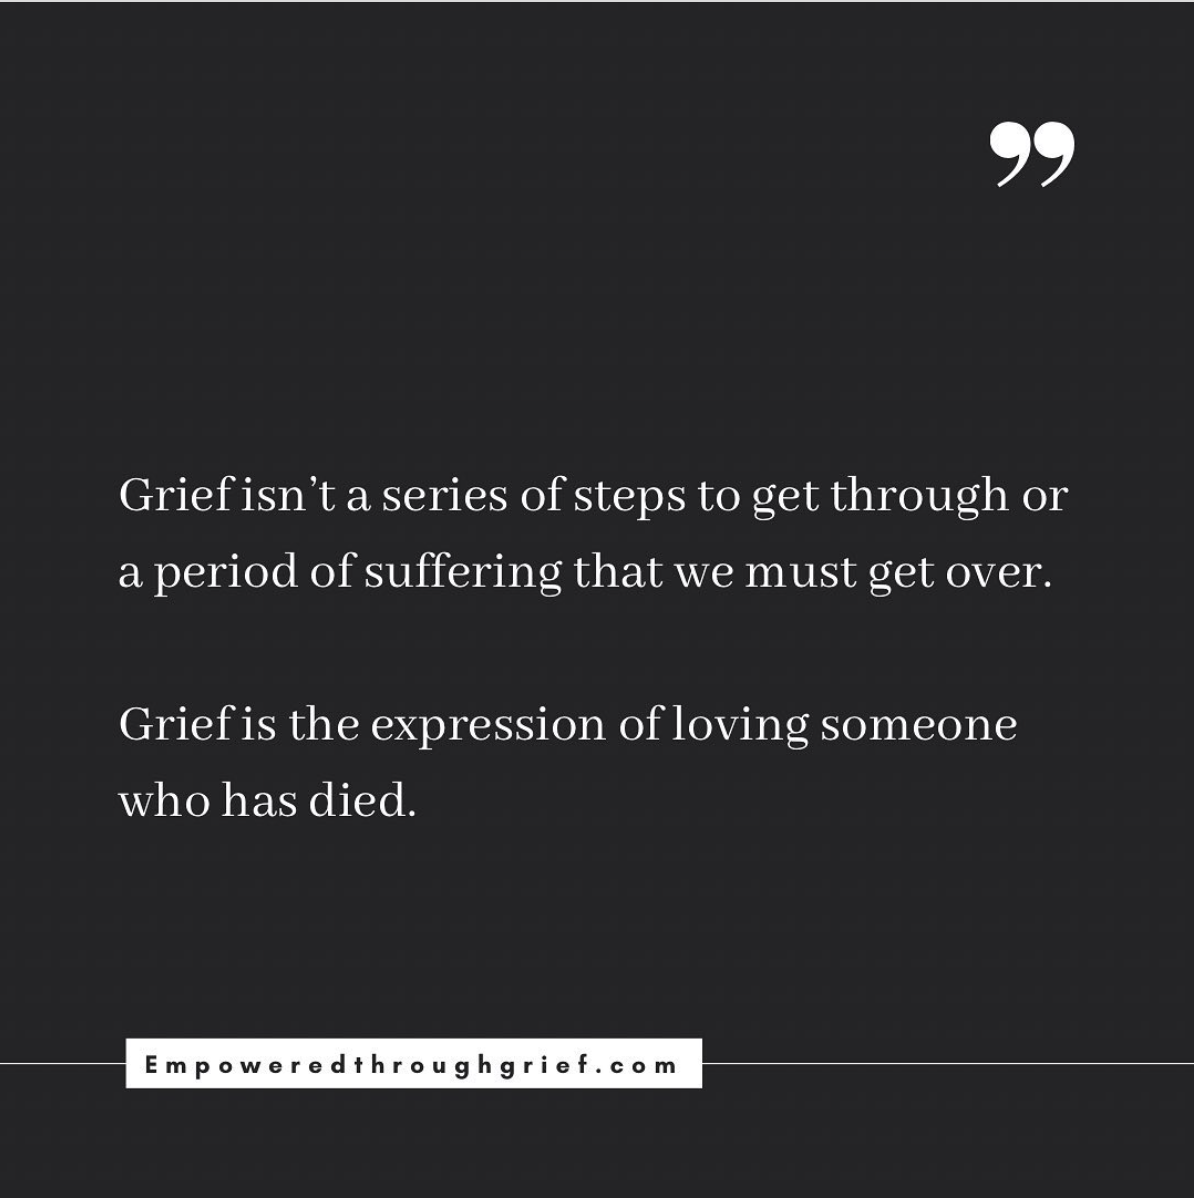 Quote: Grief isn't a series of steps to get through or a period of suffering that we must get over. Grief is the expression of loving someone who has died.